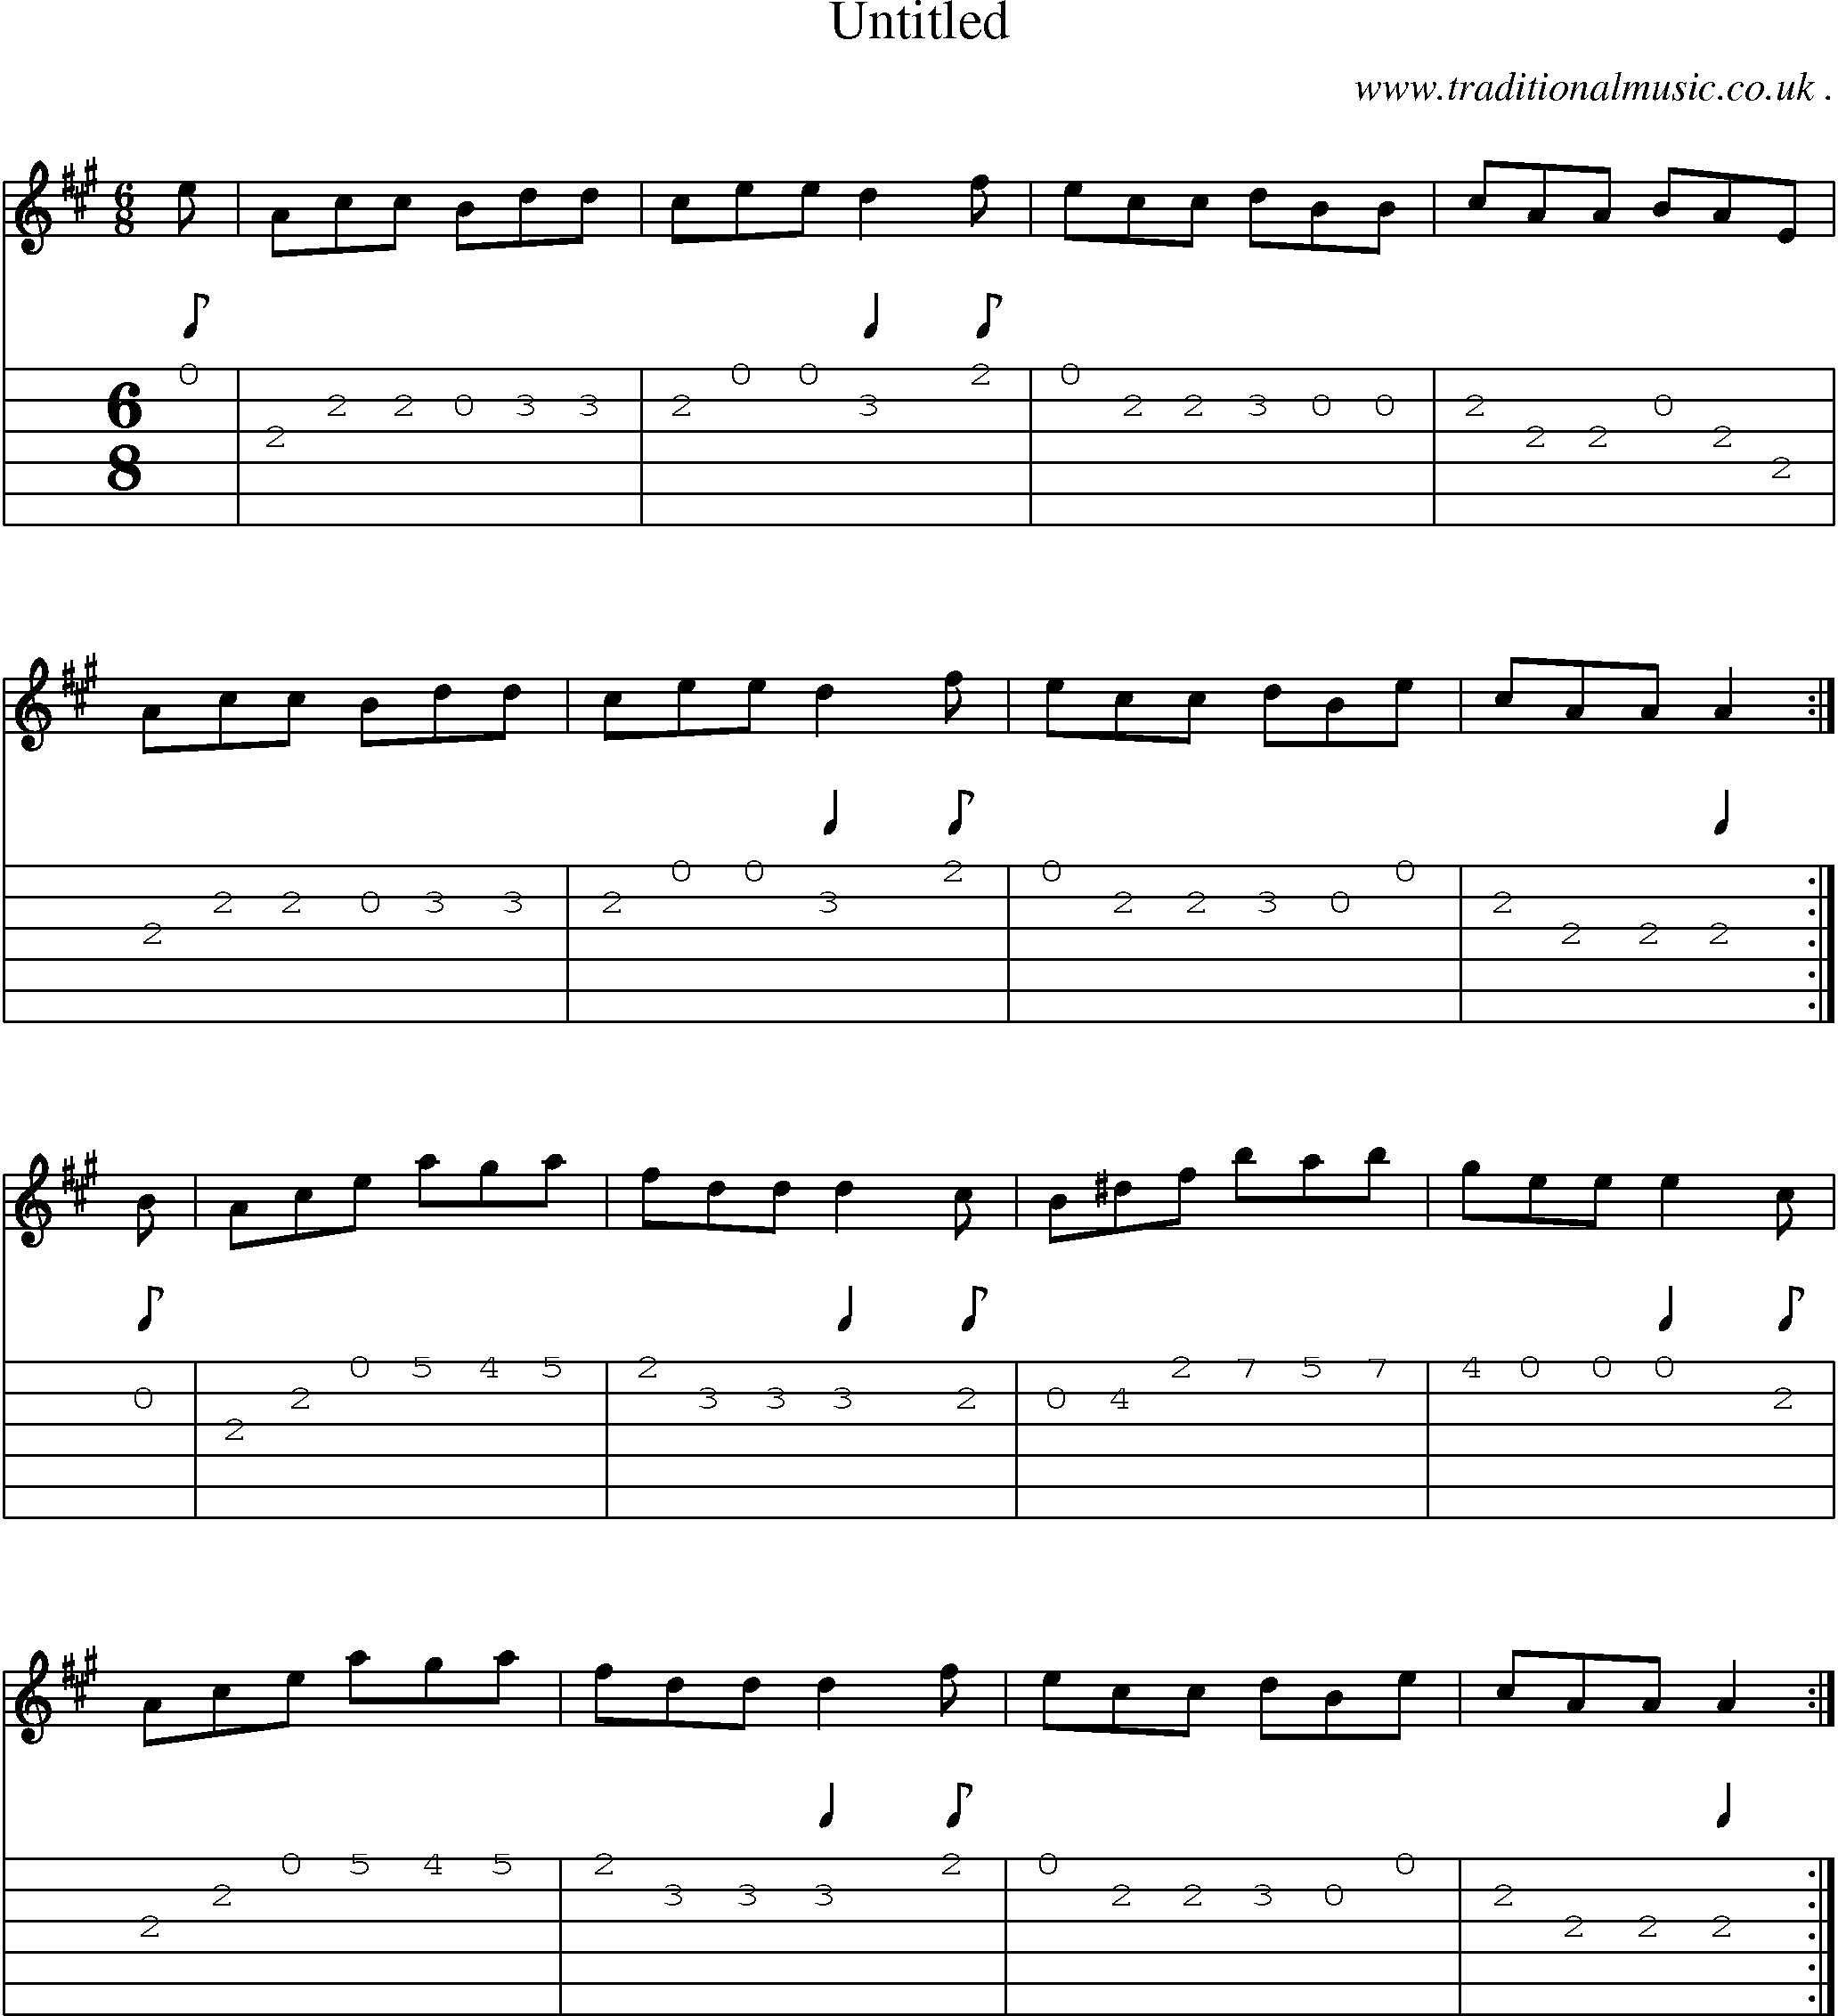 Sheet-music  score, Chords and Guitar Tabs for Untitled